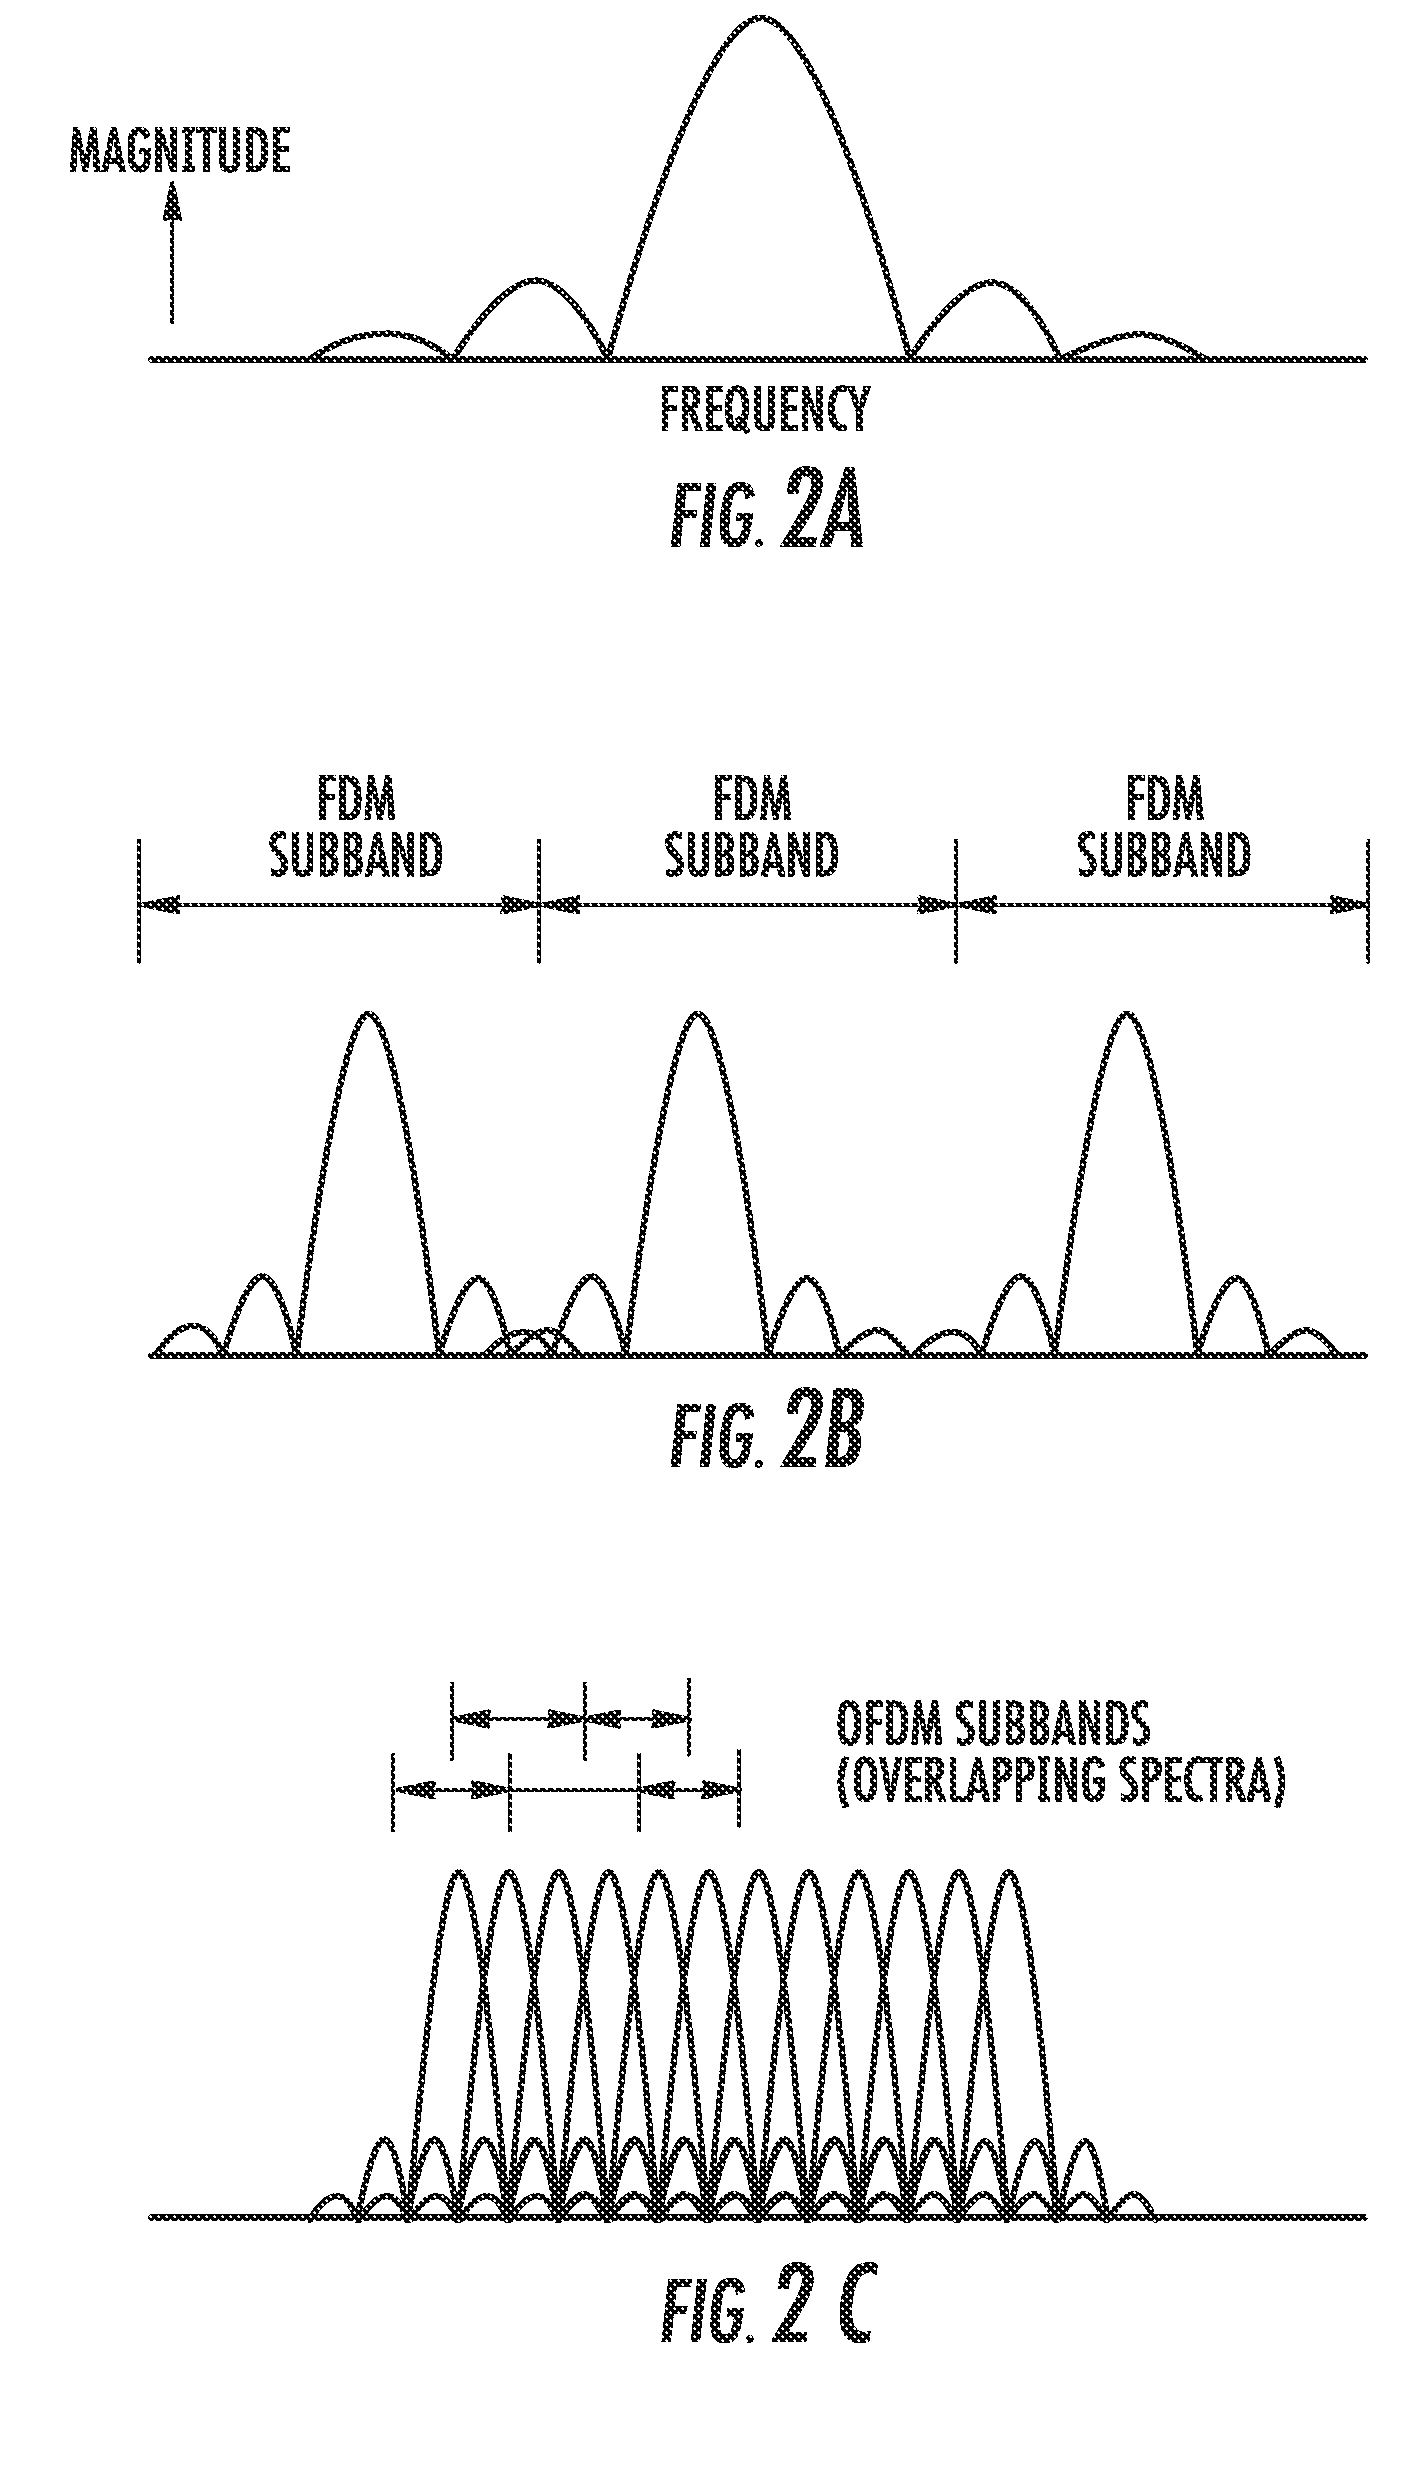 Orthogonal frequency division multiplexing (OFDM) communications device and method that incorporates low papr preamble with circuit for measuring frequency response of the communications channel